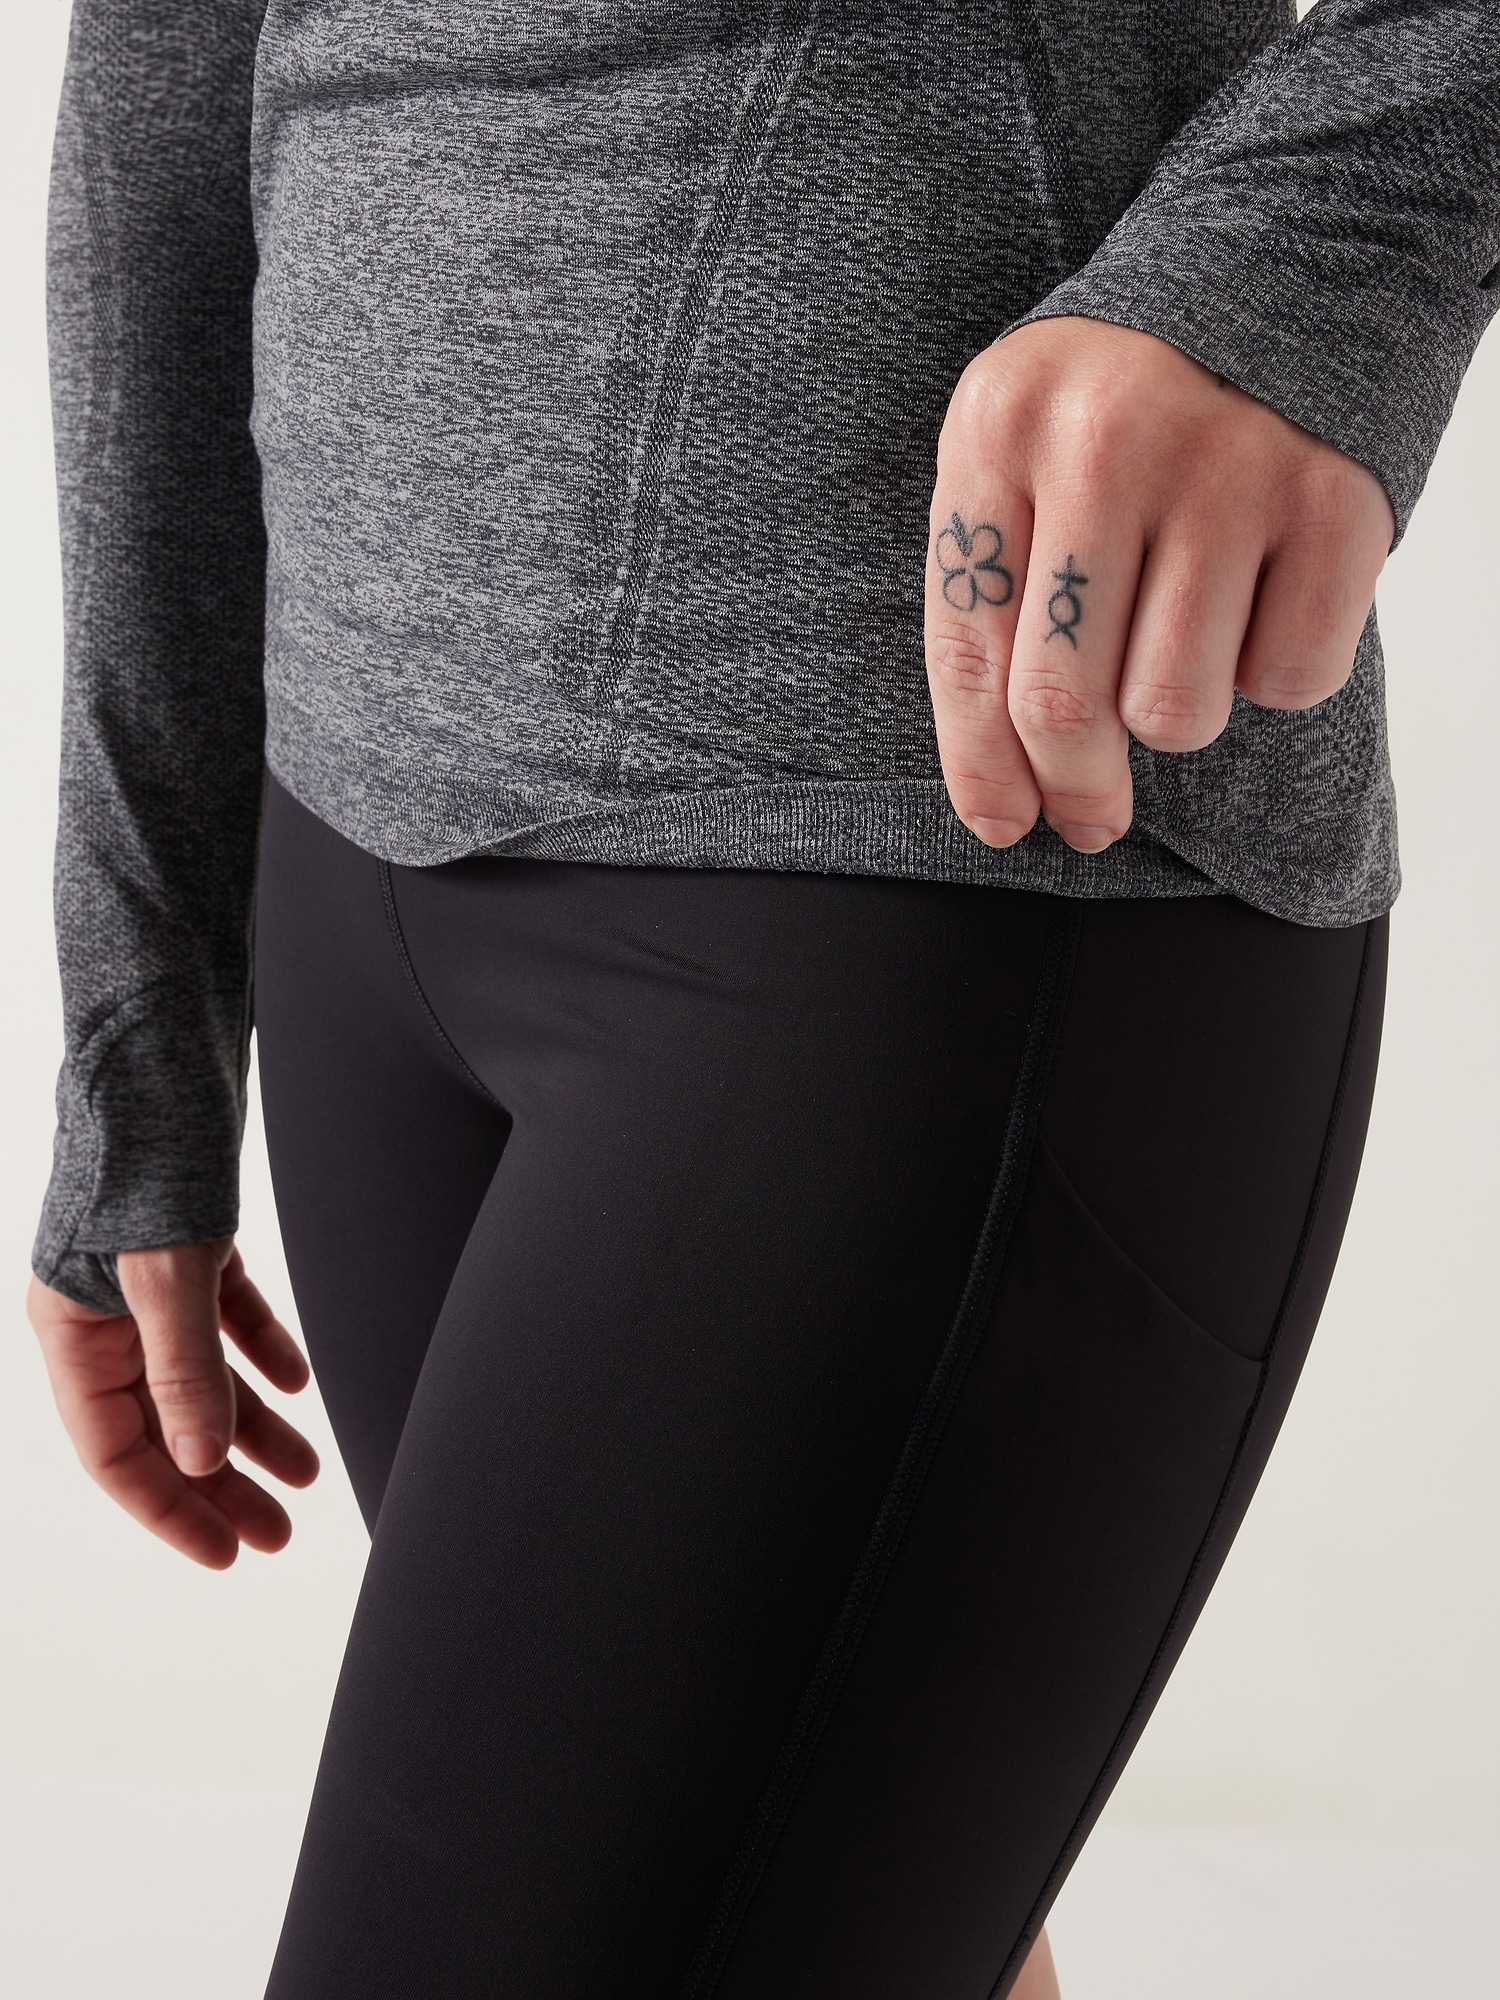 Gearhead: Looking for running tights with pockets? Athleta, Under Armour  can help